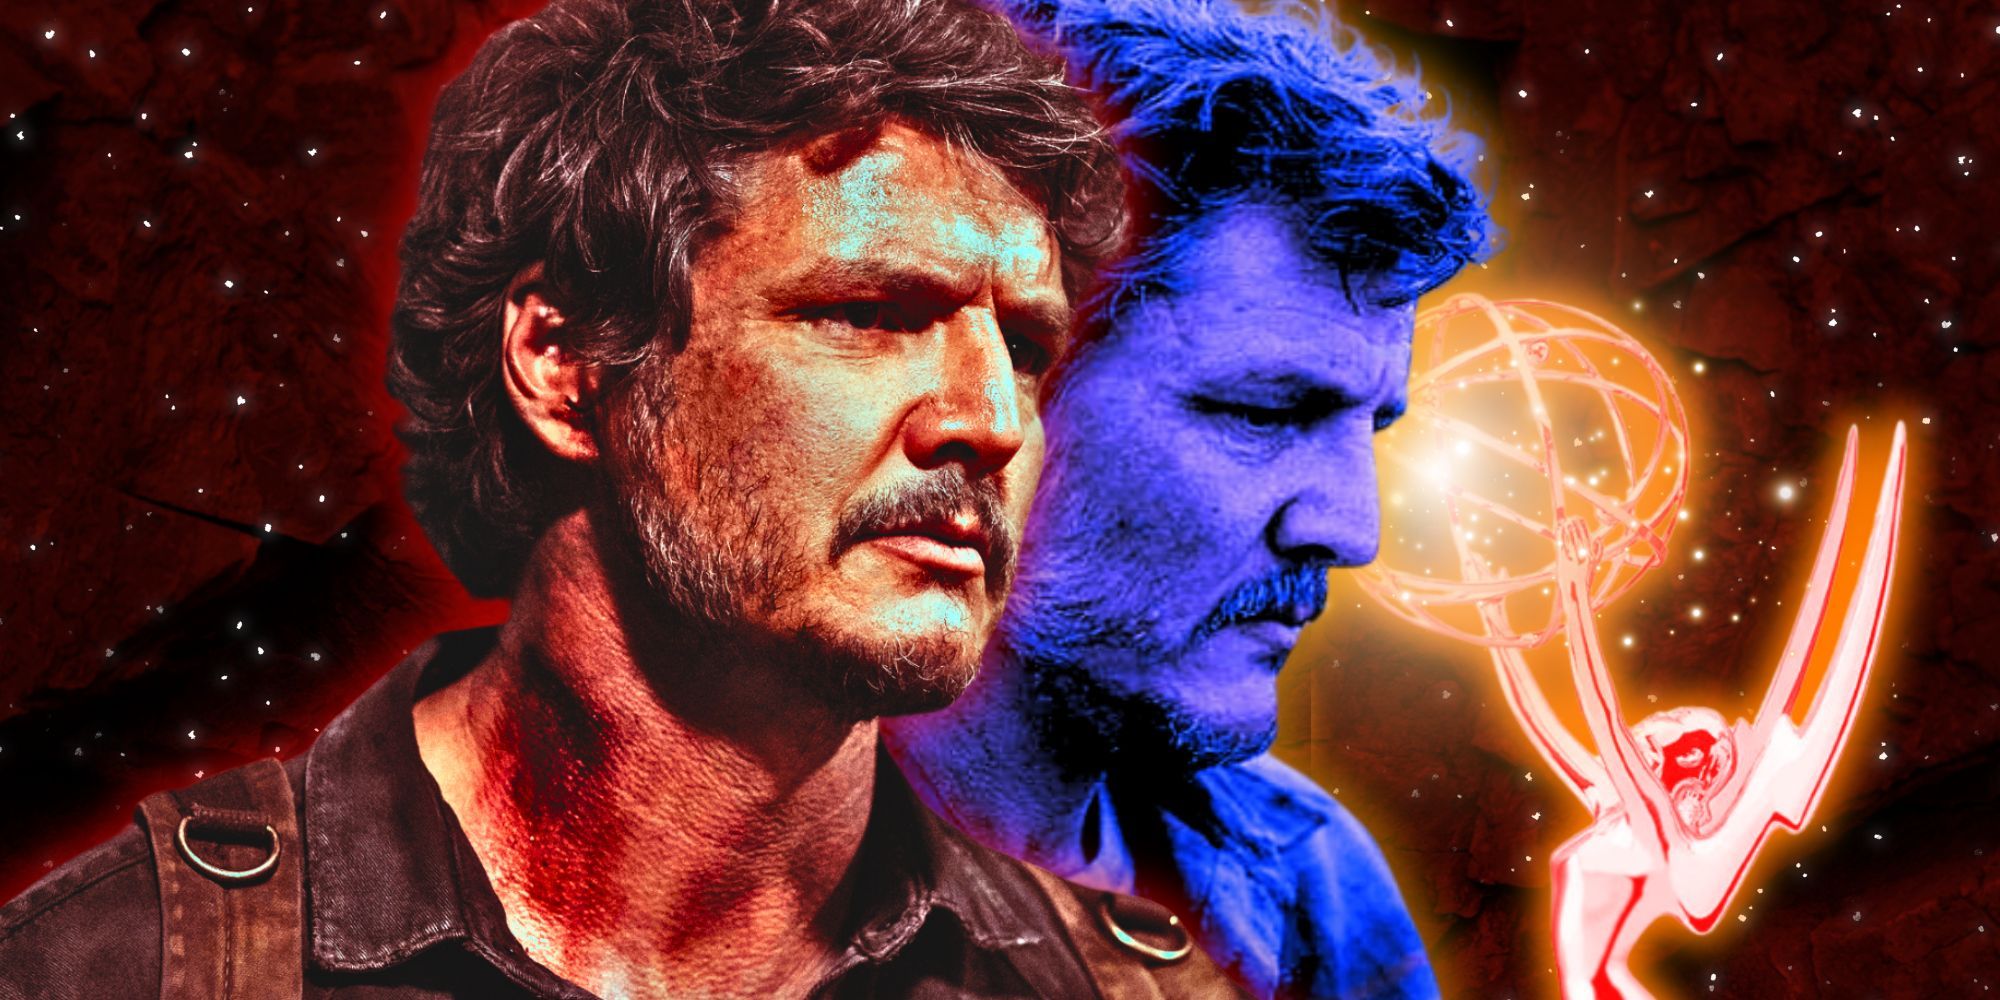 Pedro Pascal as Joel in The Last Of Us and Emmy awards